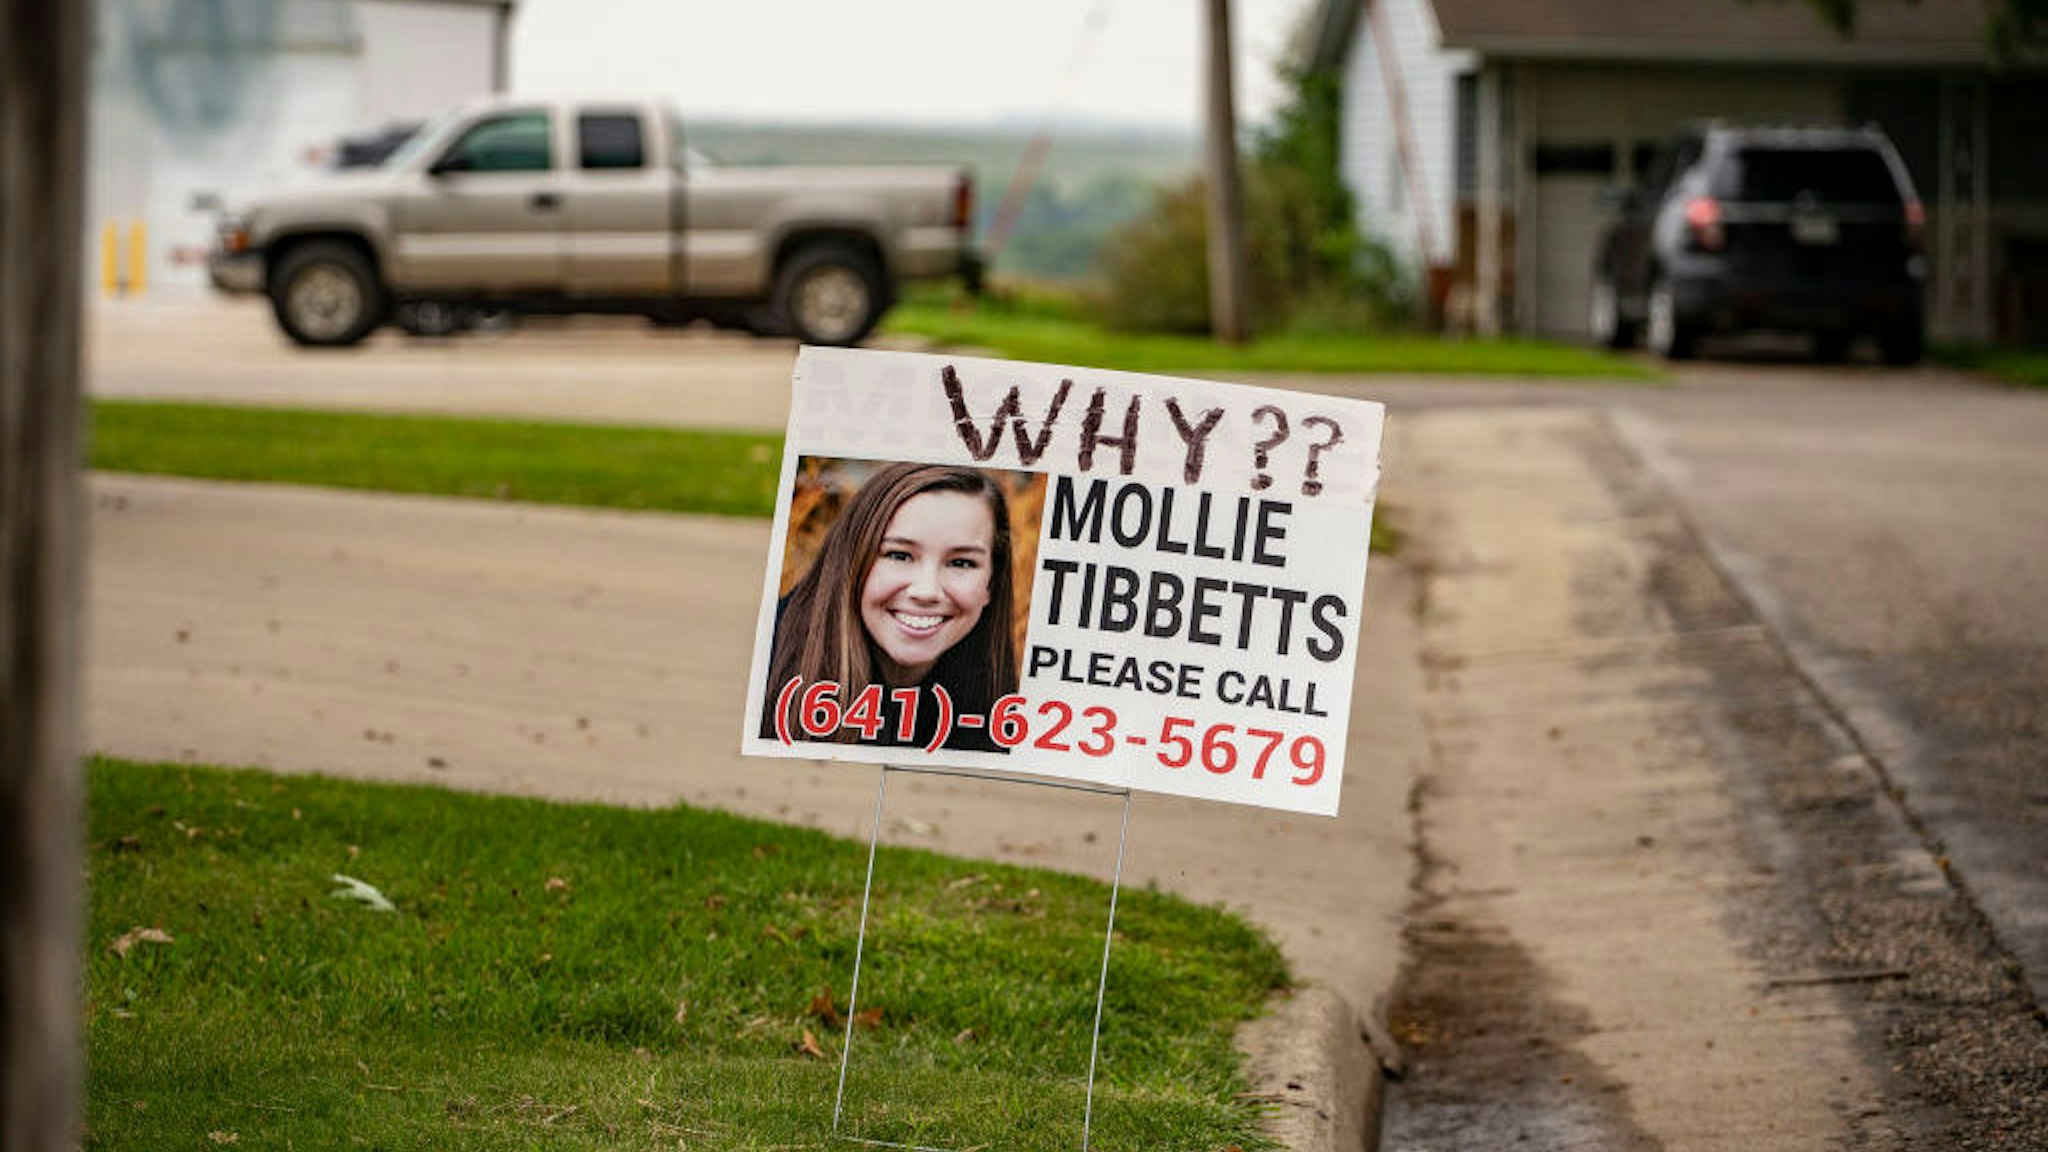 BROOKLYN, IA - AUGUST 24: A sign seeking information about Mollie Tibbetts, with "WHY??" written above, stands in a yard in Brooklyn, Iowa on Friday, August 24, 2018. (Photo by KC McGinnis/For The Washington Post via Getty Images)